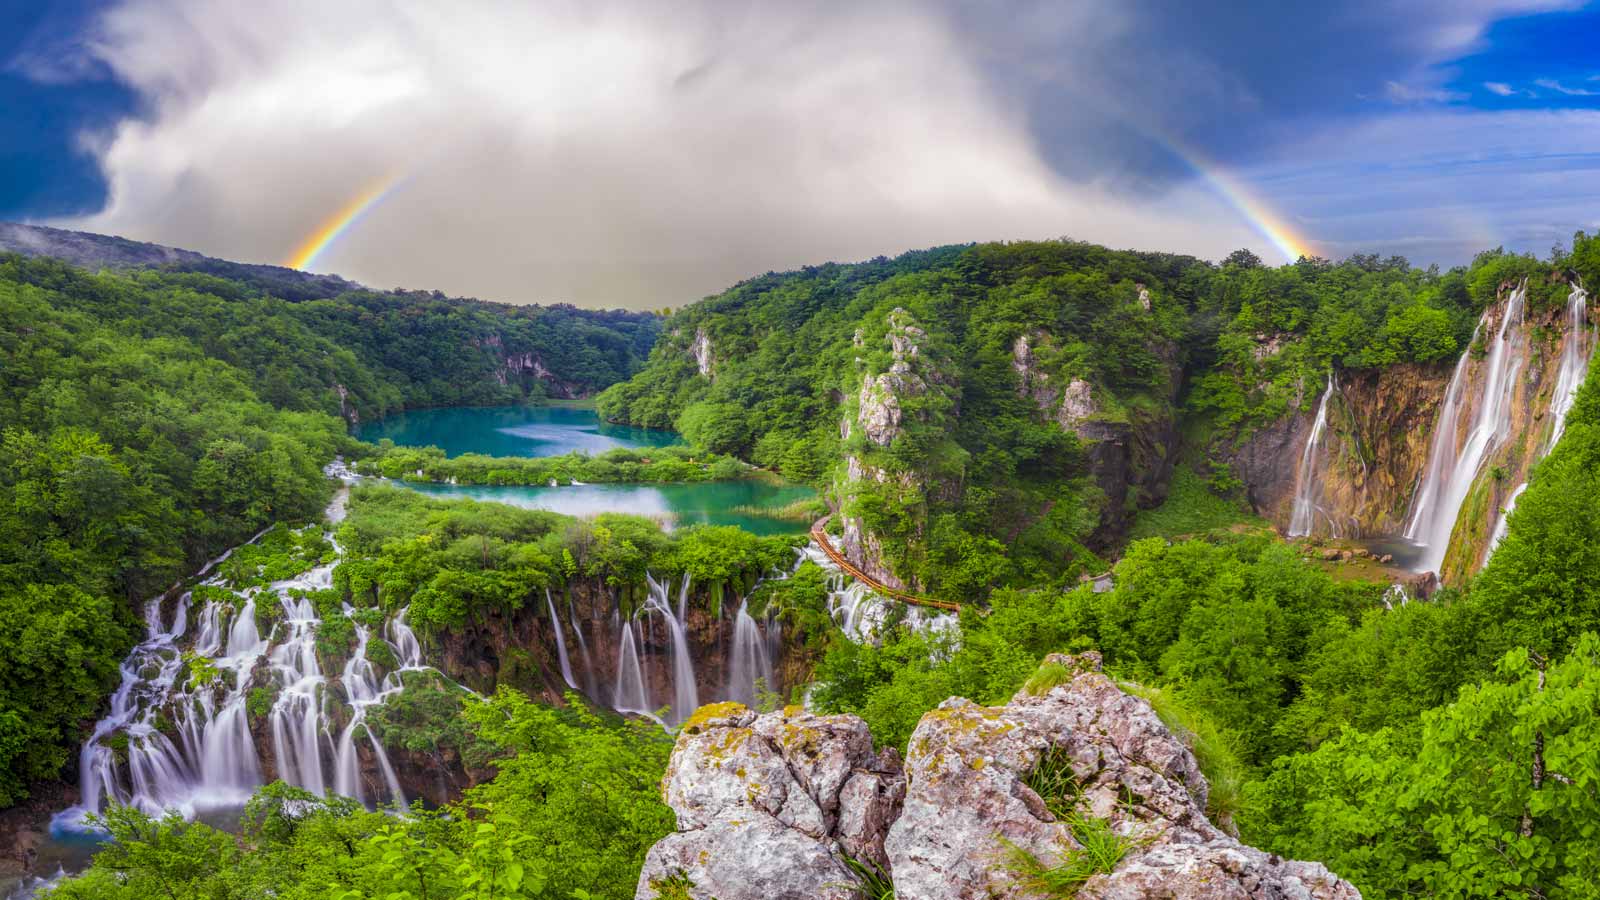 <p><span>The 16 lakes of Plitvice Waterfalls in Plitvice Lakes National Park, Croatia, are a sight to behold. What makes these waterfalls unique are the vibrant hues of blue and green—ranging from aquamarine to emerald and turquoise—visible as the water gracefully slides over limestone and chalk rocks.</span></p><p><span>The park is a popular destination, drawing in over one million visitors annually. Its picturesque setting, surrounded by a lush green landscape, makes it a perfect spot for social media photos.</span></p>